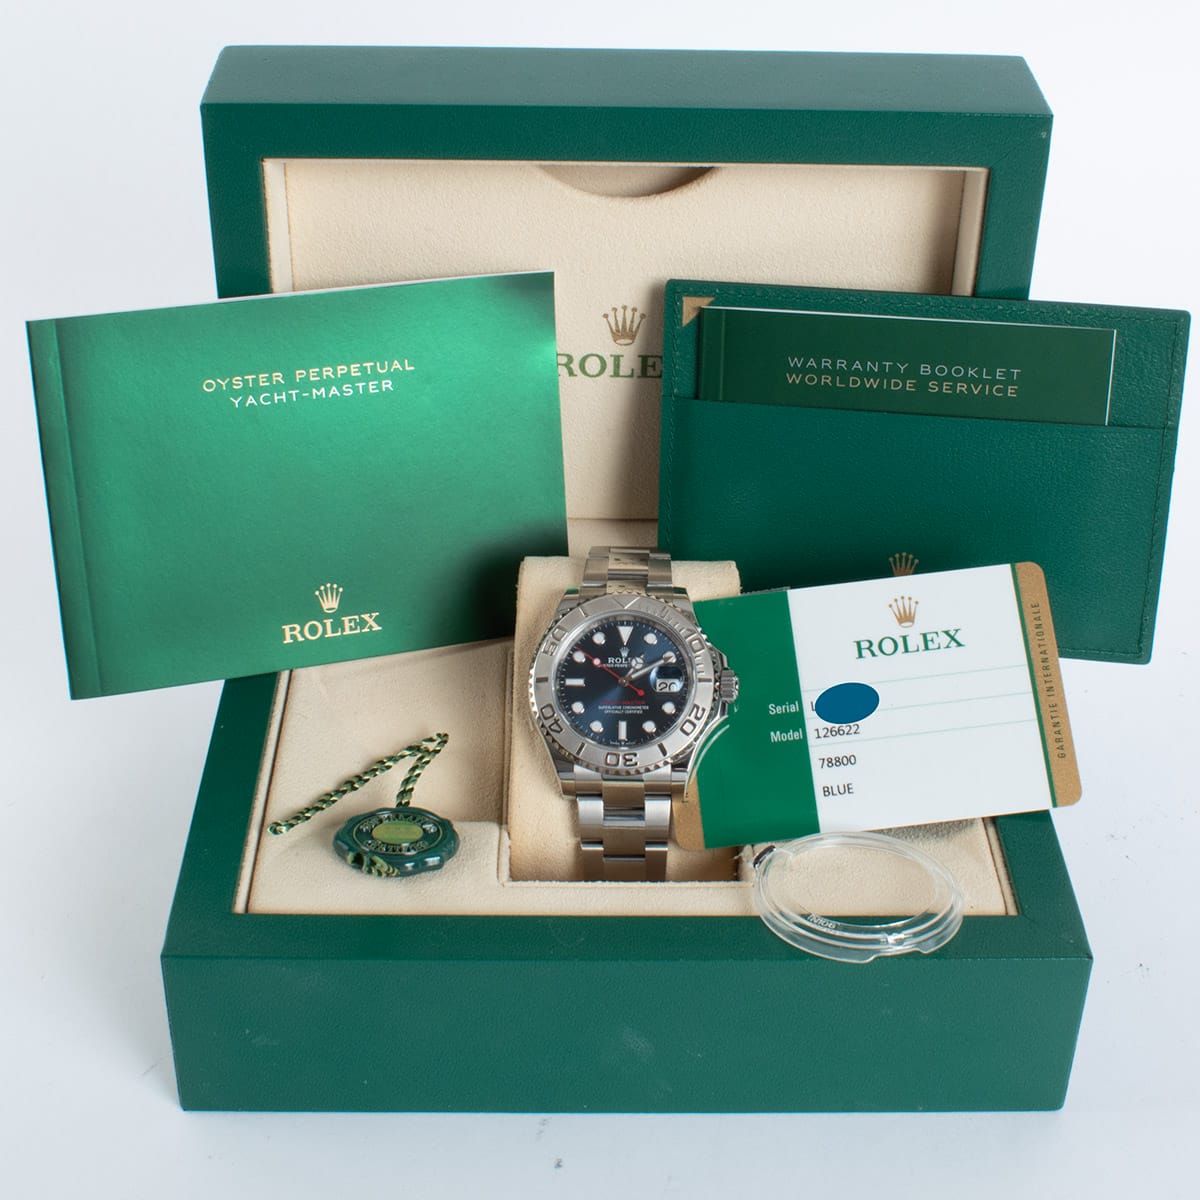 View in Box of Yacht-Master 40